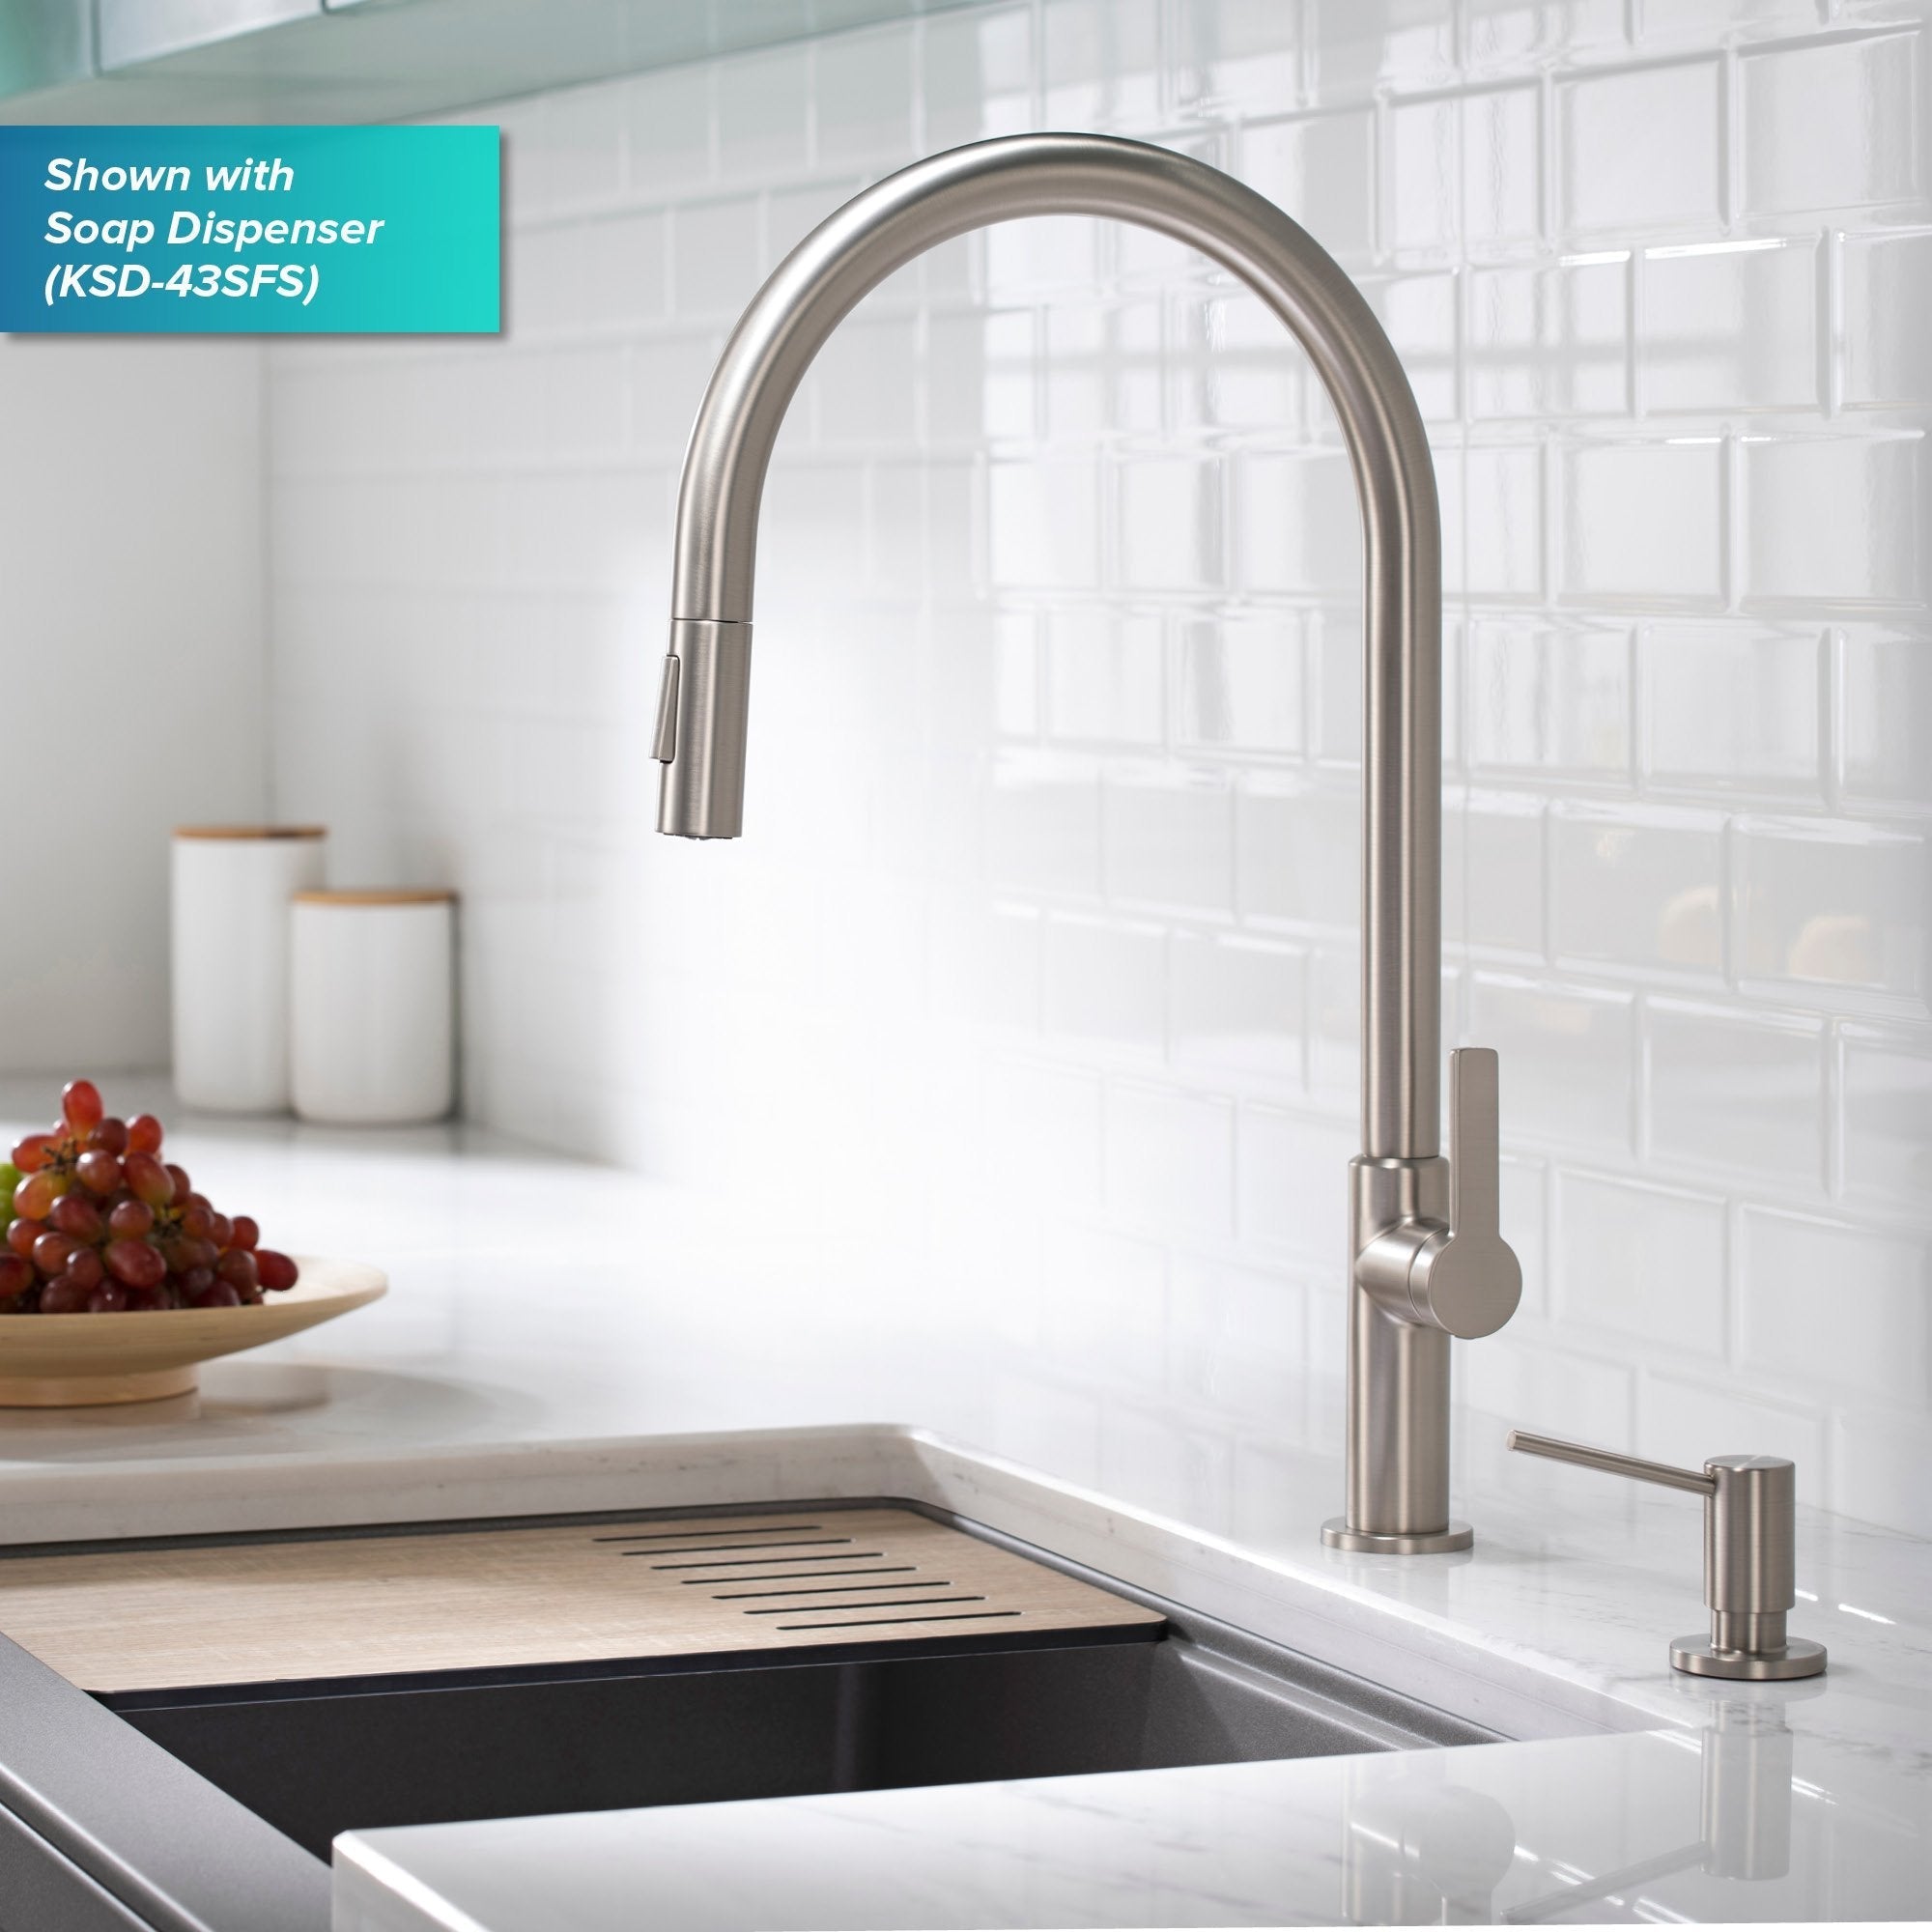 KRAUS Oletto High-Arc Single Handle Pull-Down Kitchen Faucet in Spot Free Stainless Steel KPF-2821SFS | DirectSinks